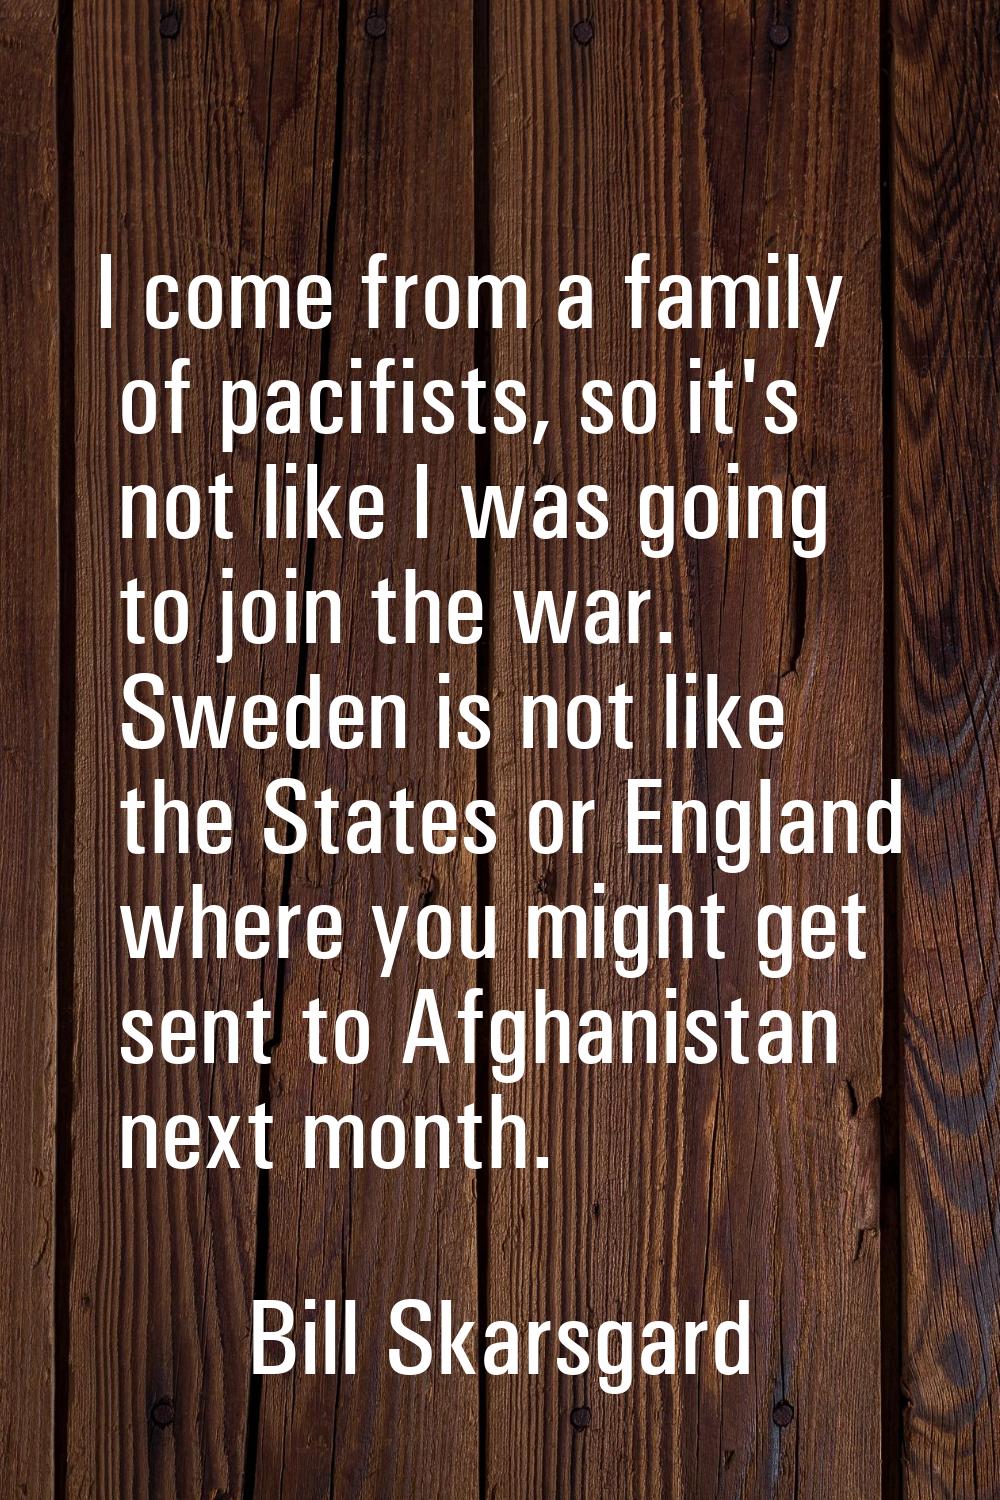 I come from a family of pacifists, so it's not like I was going to join the war. Sweden is not like